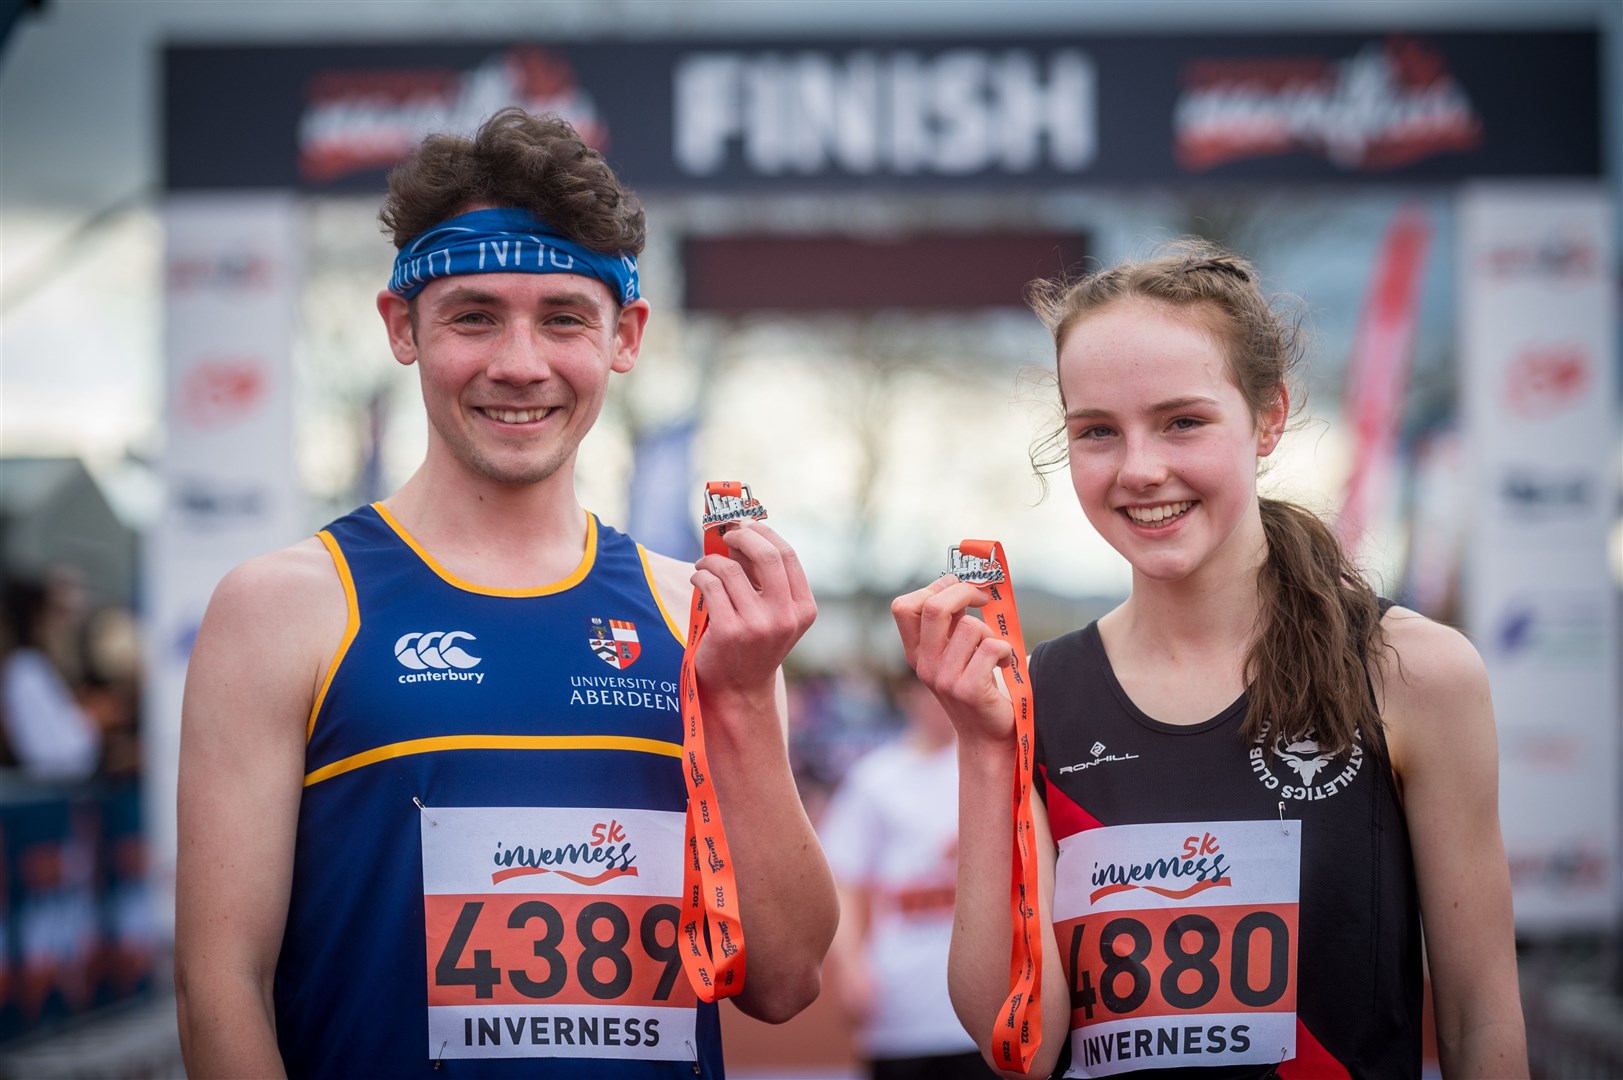 Luke Nelson, University of Aberdeen Athletics Club and Caitlyn Heggie of Ross County Athletics Club won the Inverness 5k. Picture: Callum Mackay